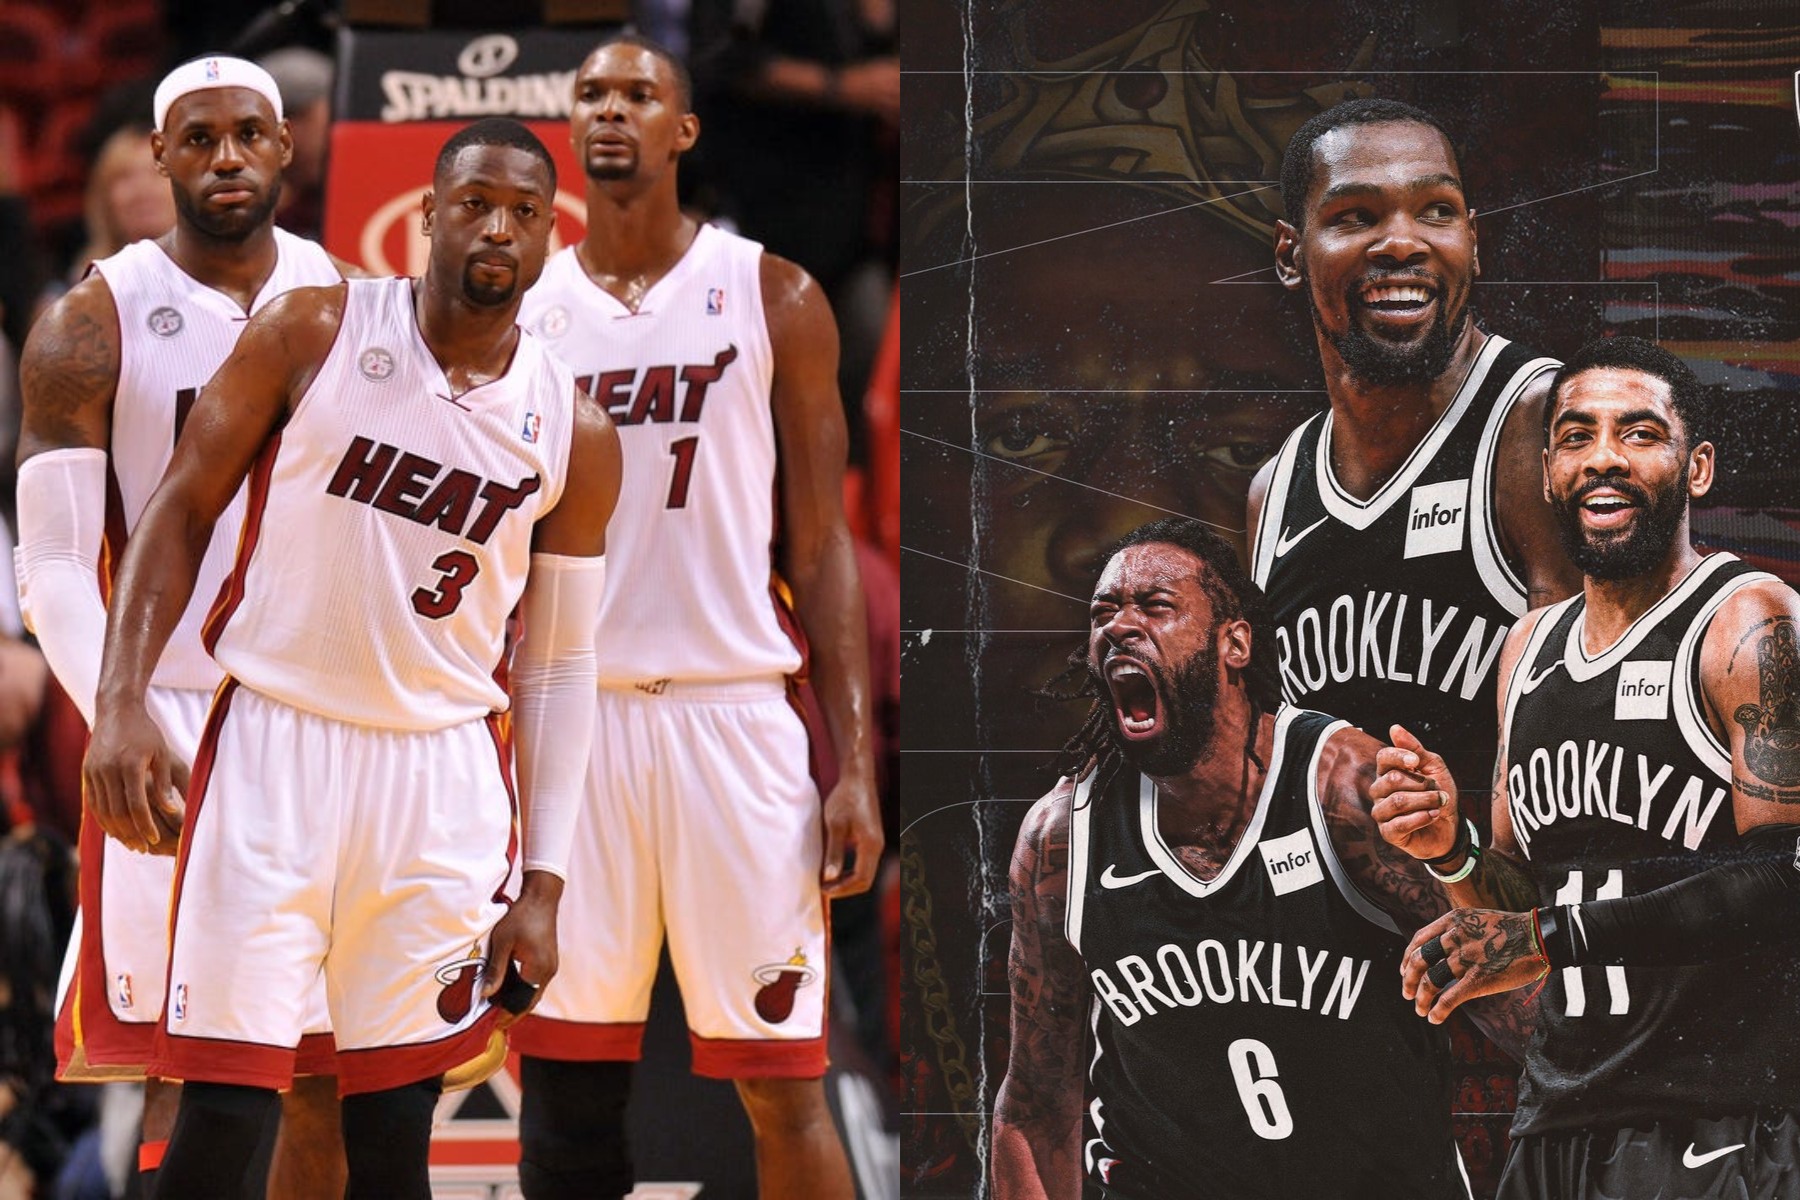 Dwyane Wade, Lebron James And Kevin Durant - Kd And Kyrie Brooklyn - HD Wallpaper 